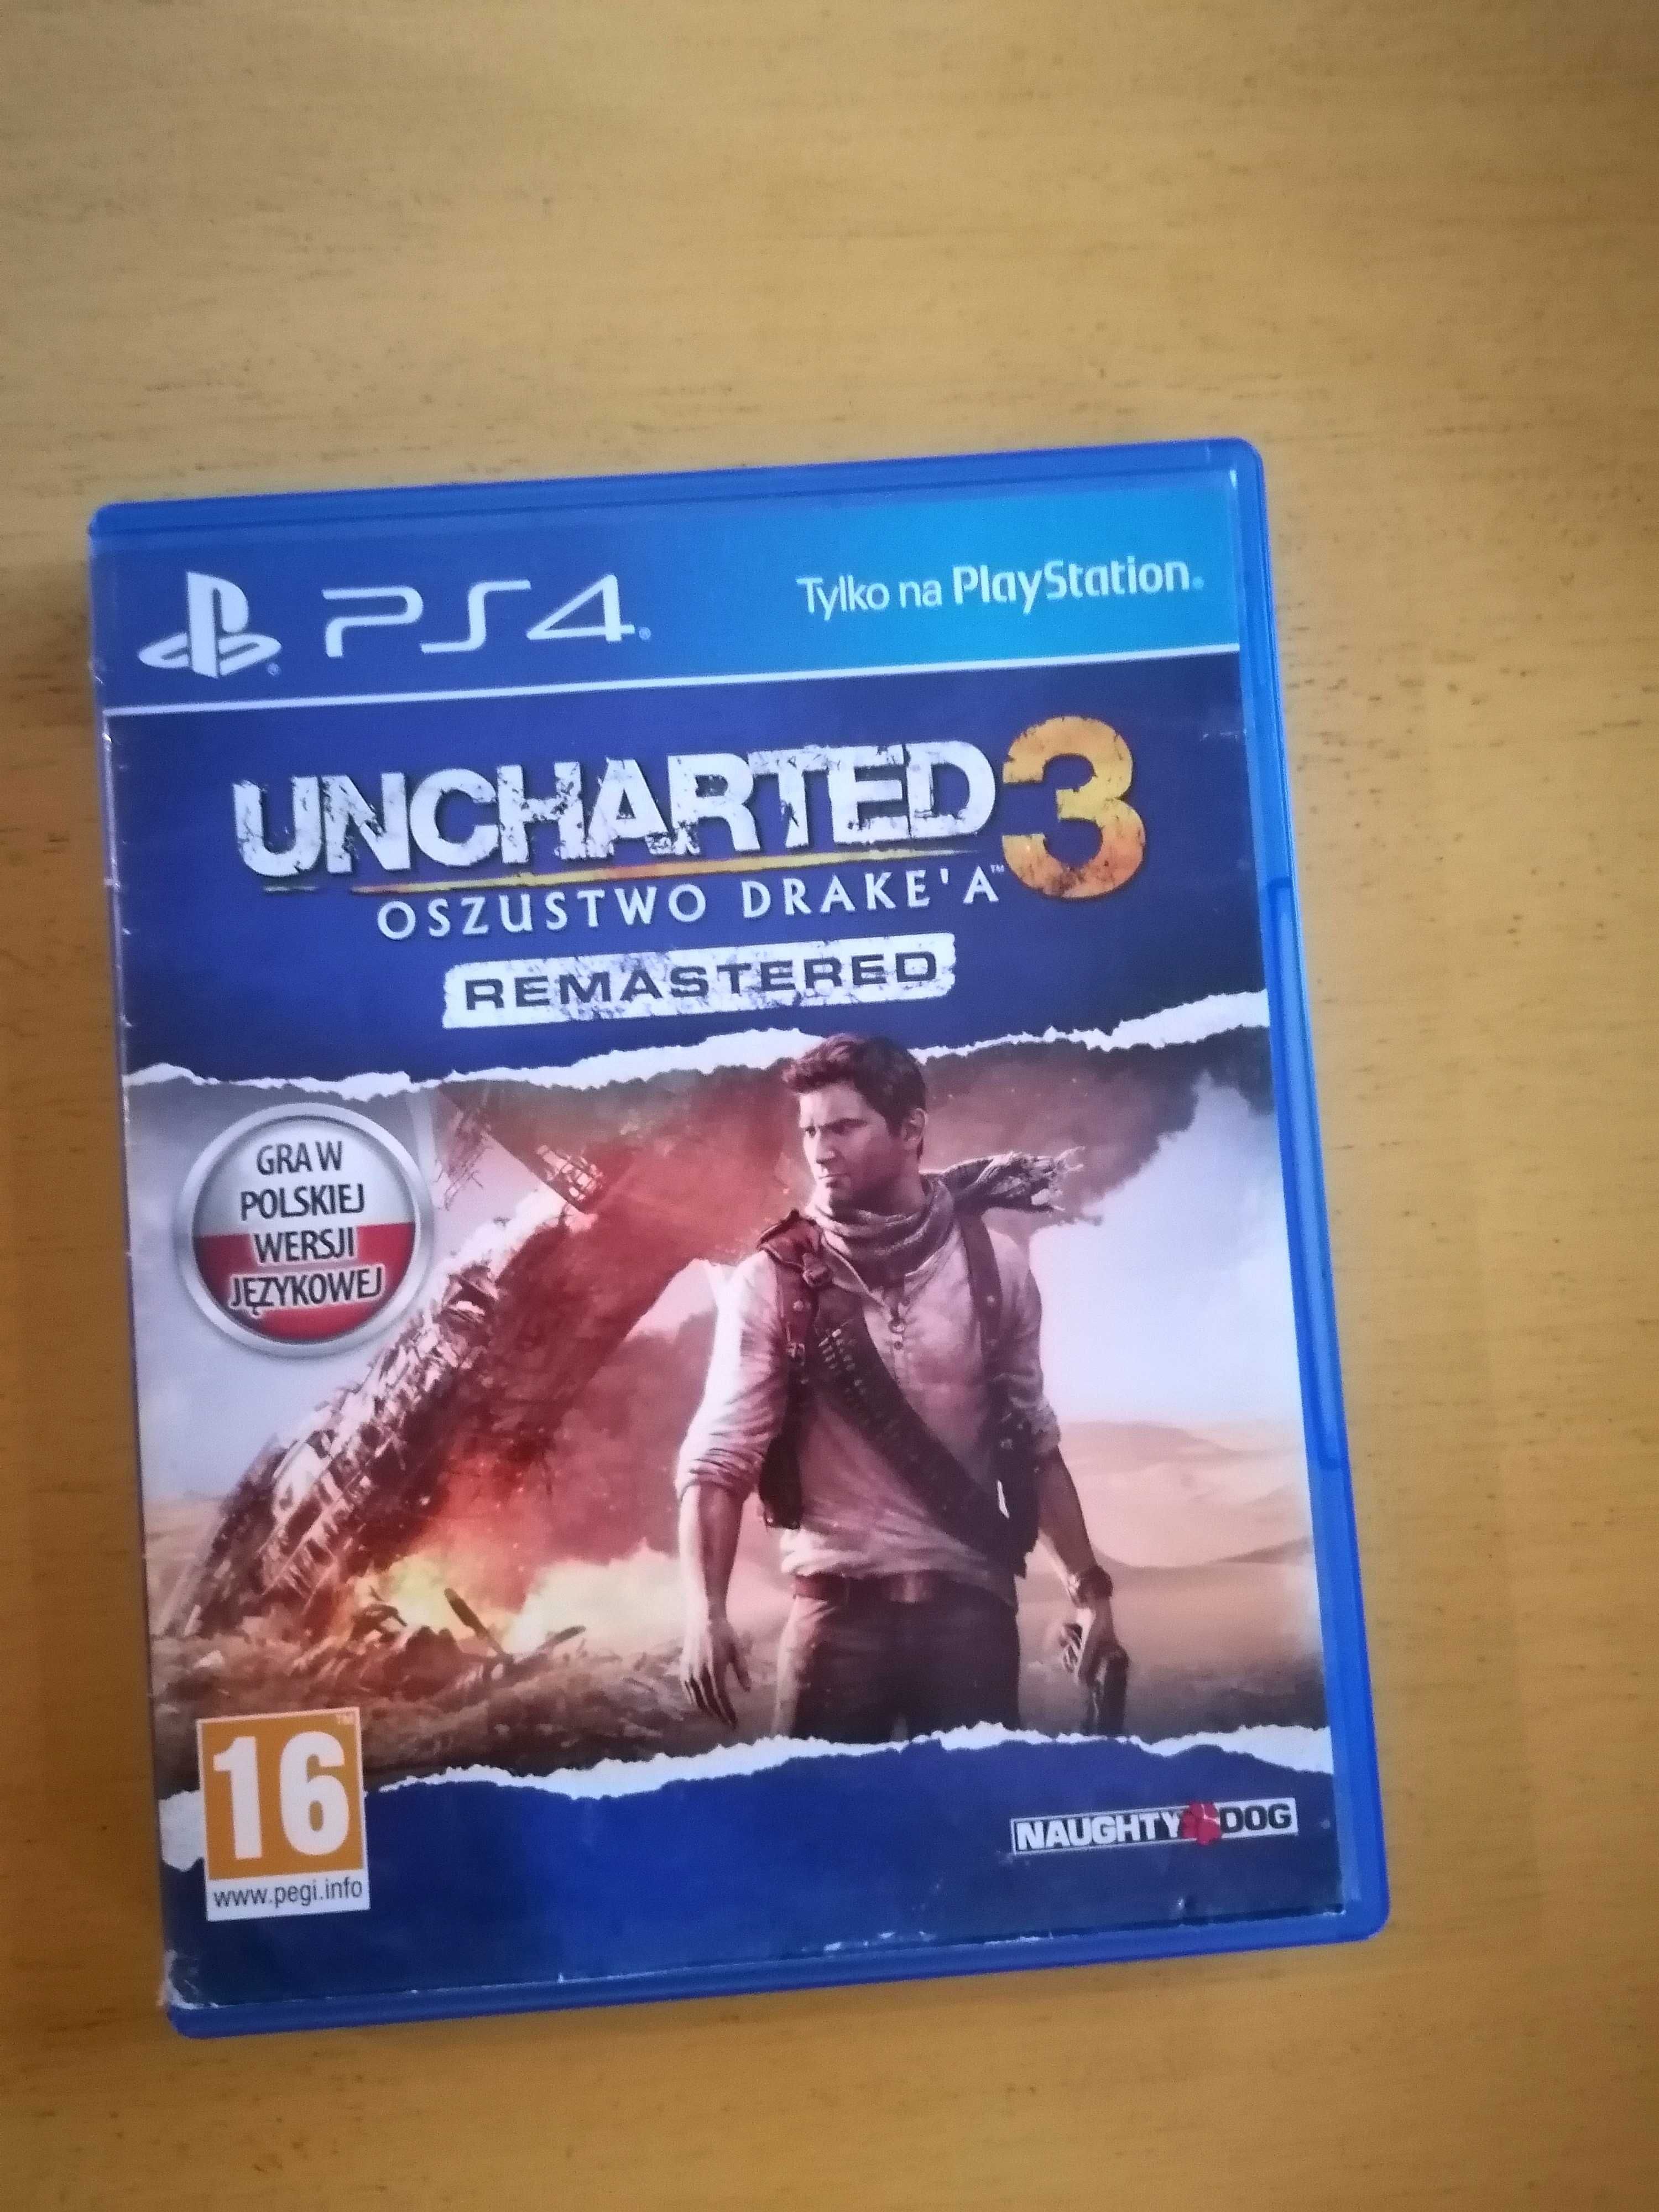 Uncharted 3: Oszustwo Drake'a Remastered playstation 4 Uncharted 3 ps4